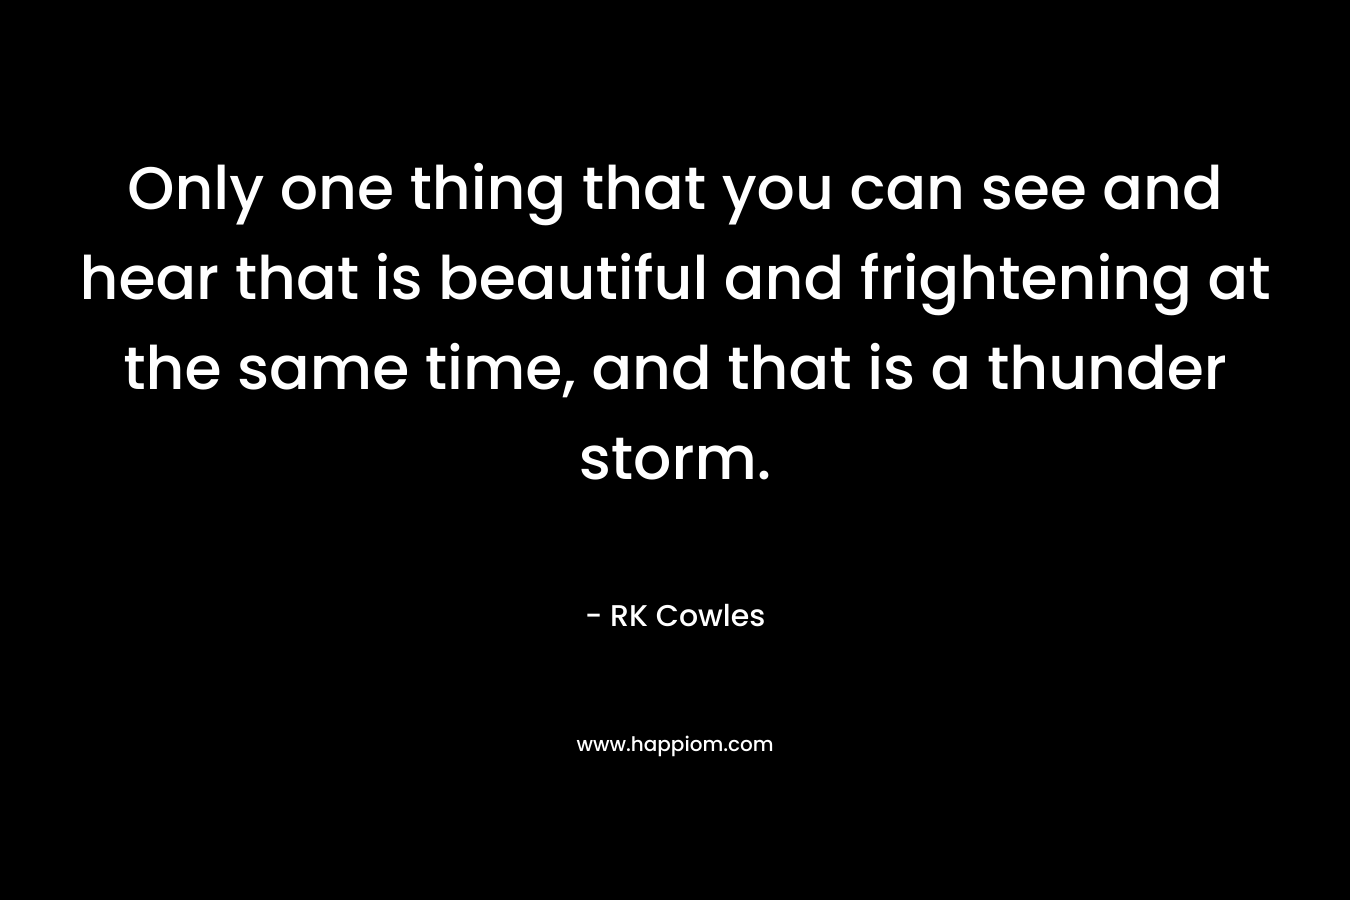 Only one thing that you can see and hear that is beautiful and frightening at the same time, and that is a thunder storm. – RK Cowles